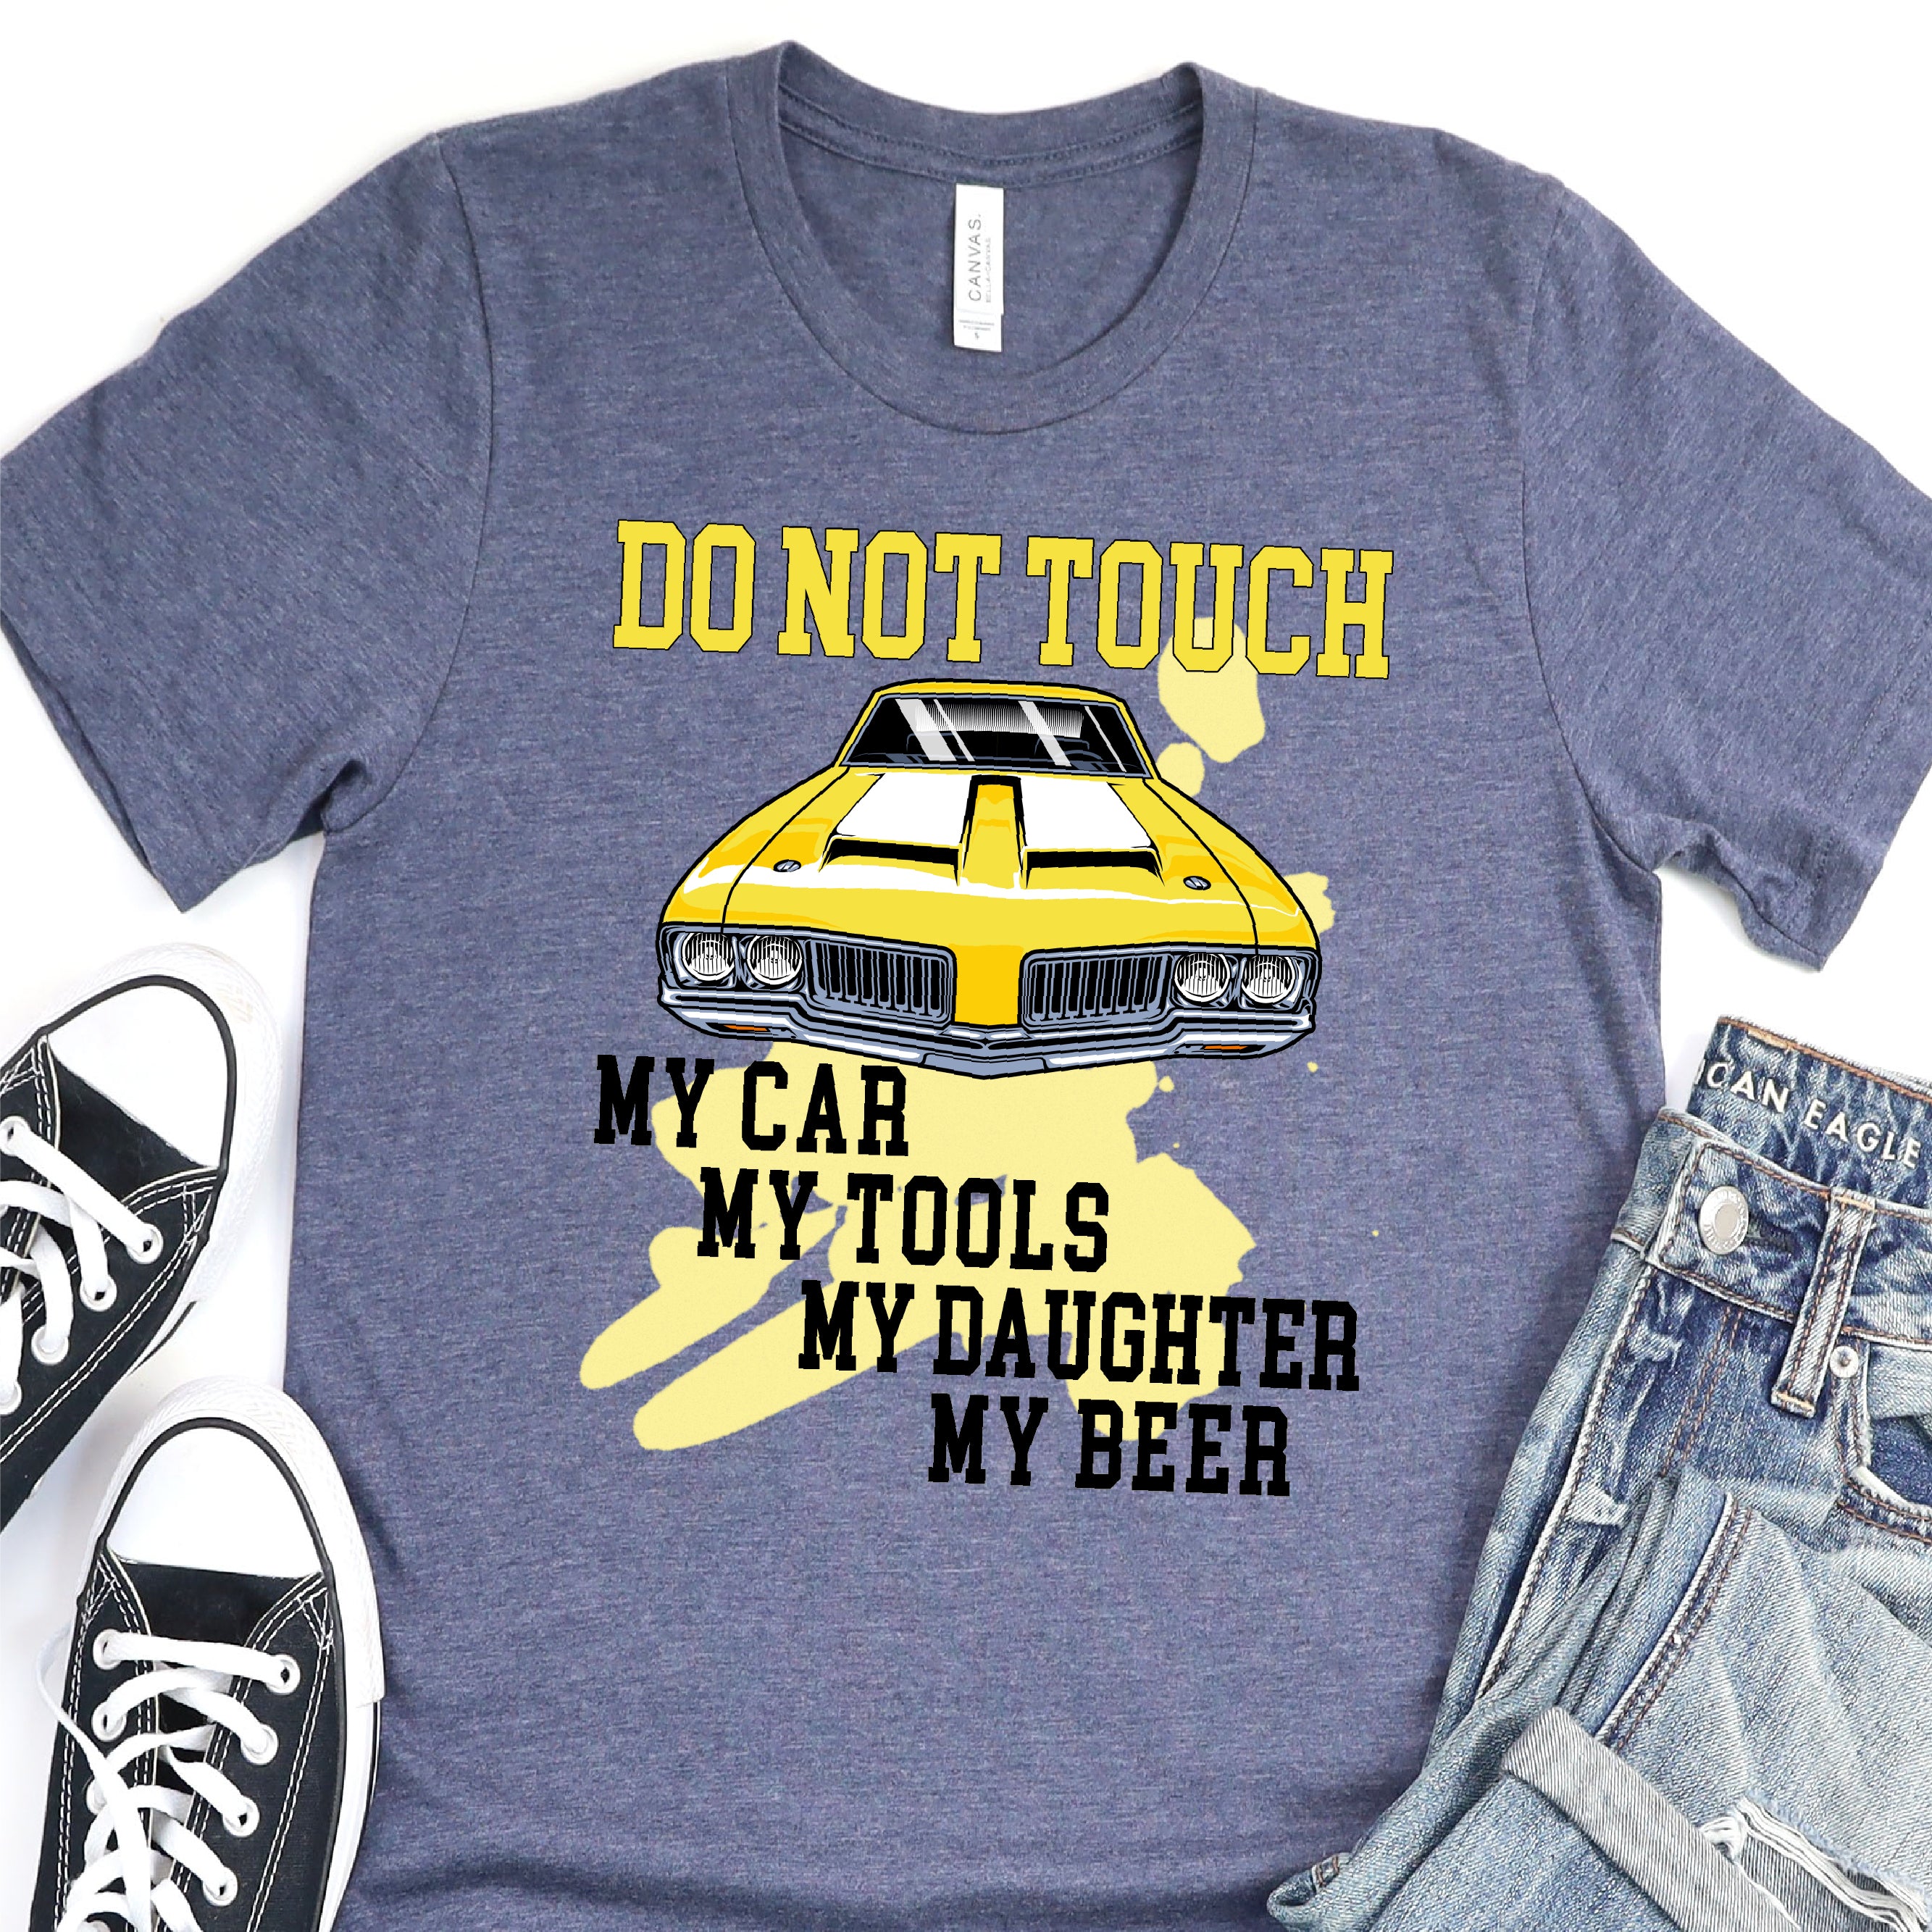 Do Not Touch My Car, My Tools, My Daighter, My Beer - Father's Day DTF Transfer - T-shirt Transfer For Dad Nashville Design House